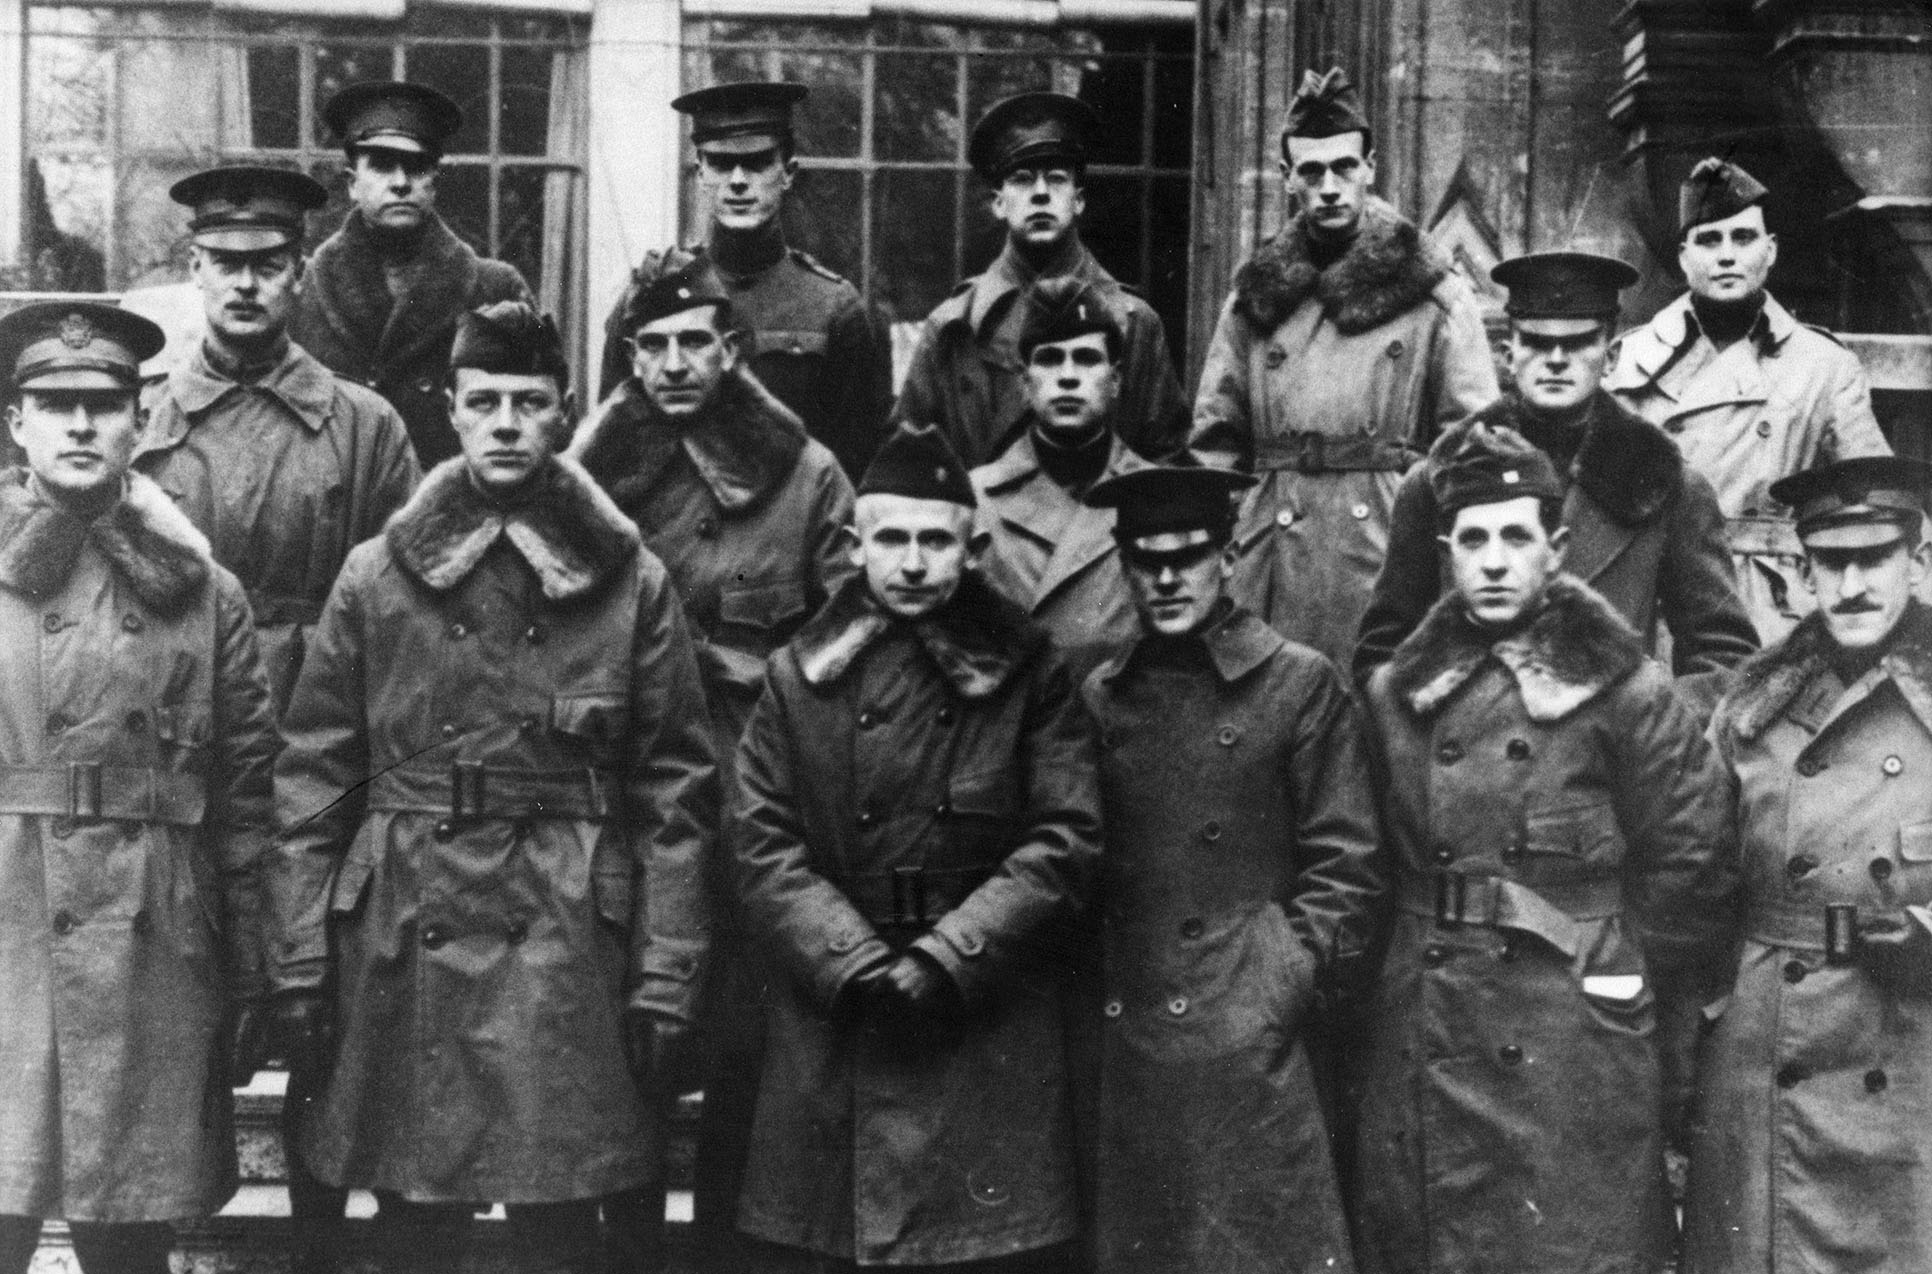 The 15 U.S. Army Officers who served as the first Diplomatic Couriers. They were assigned to the U.S. Embassy in Paris, France in 1918. Courier founder, Major Amos J. Peaslee (center) is flanked by the first group of couriers. The U.S. Army’s Silver Greyhounds were assigned to the U.S. Embassy in Paris in 1918 as part of the Delegation to Negotiate Peace, becoming the first dedicated group of diplomatic couriers in U.S. history. (U.S. Department of State photo)